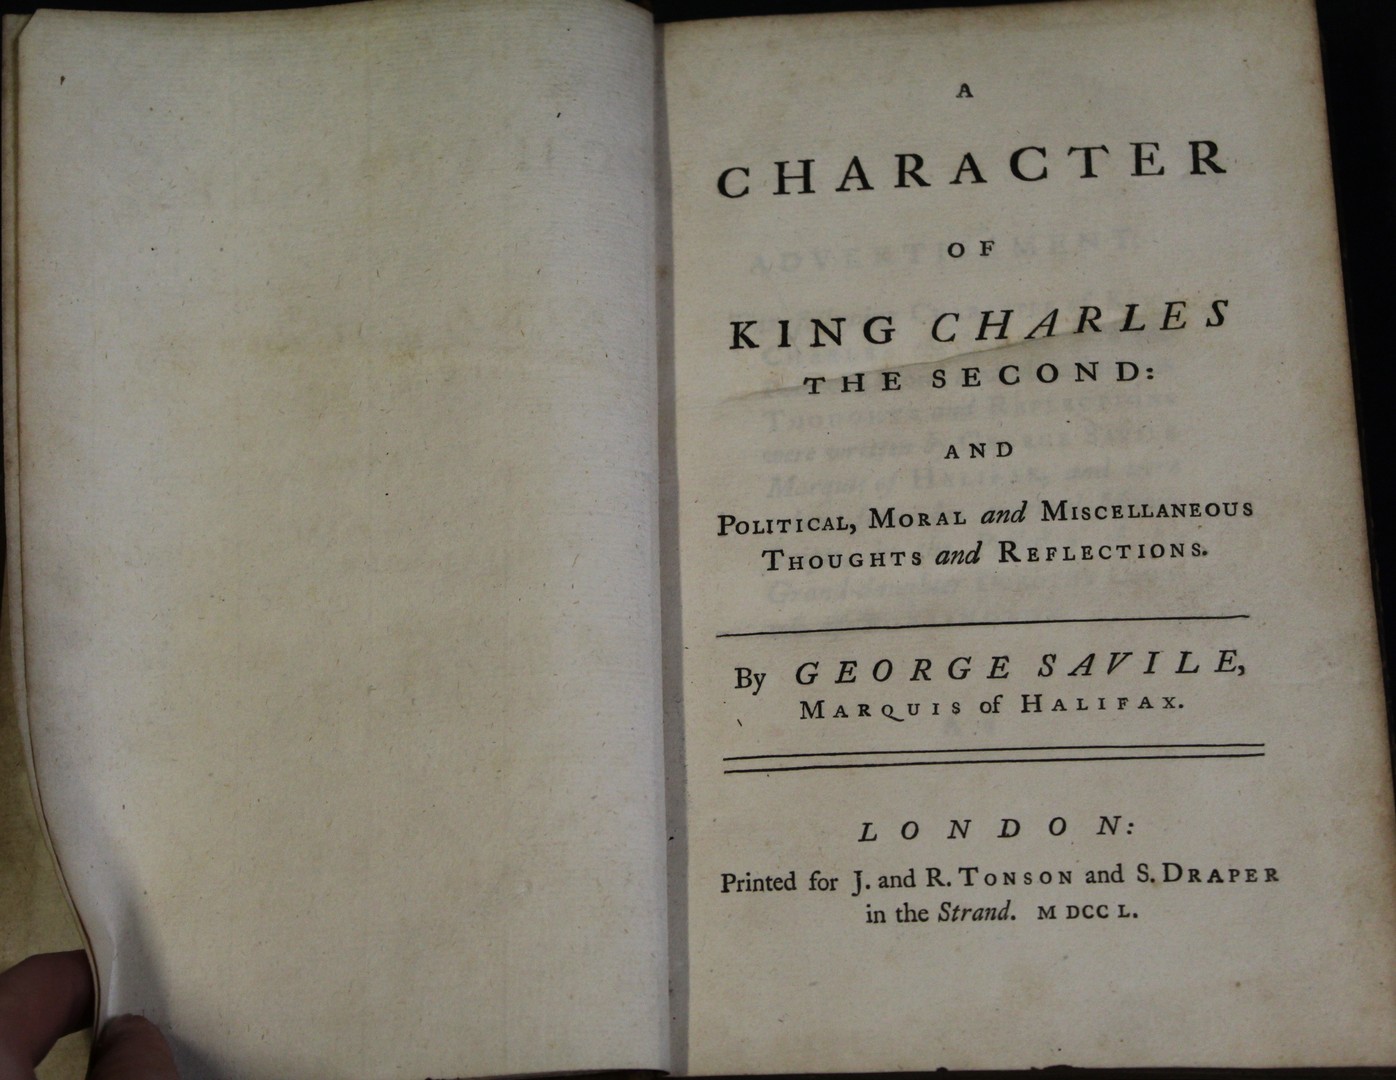 GEORGE SAVILE, MARQUIS OF HALIFAX: A CHARACTER OF KING CHARLES THE SECOND..., London for J & R